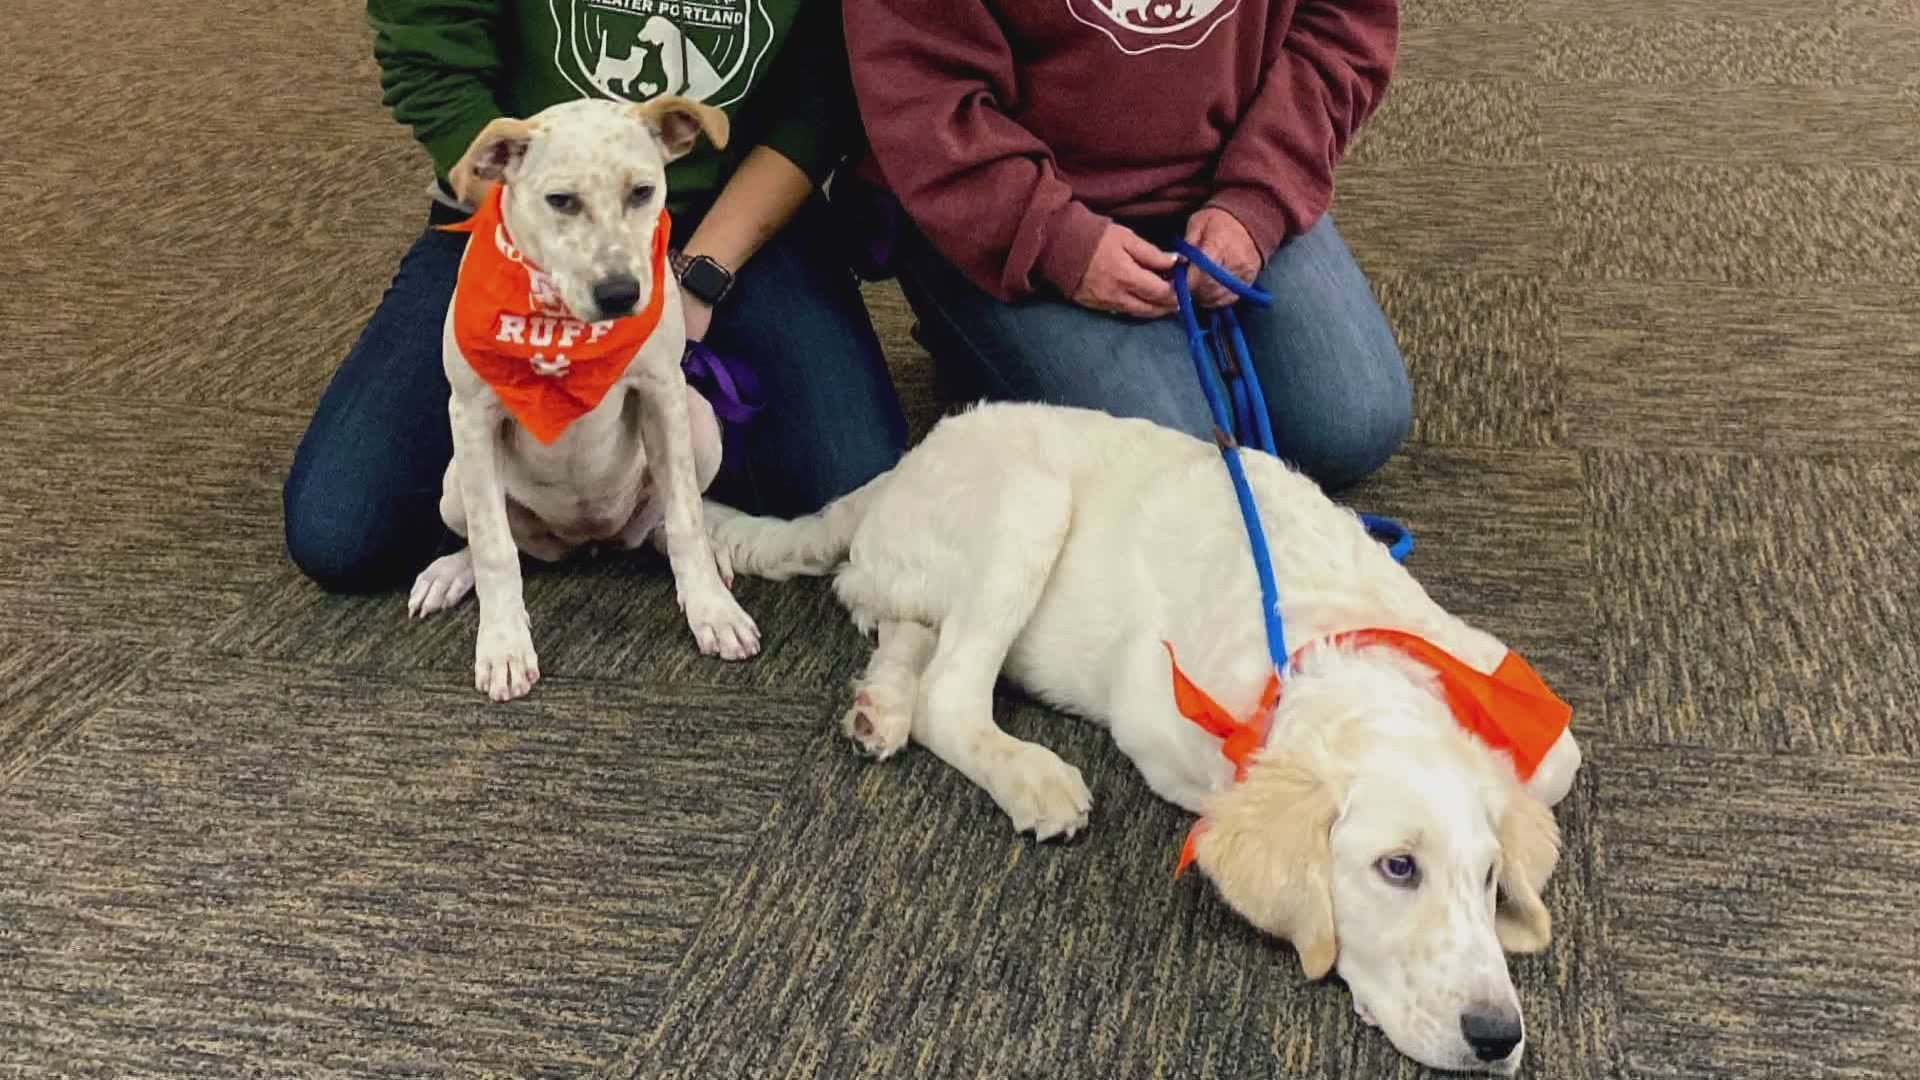 This is the fourth time that dogs from the Animal Refuge League of Greater Portland have made an appearance in the furriest game of the year.